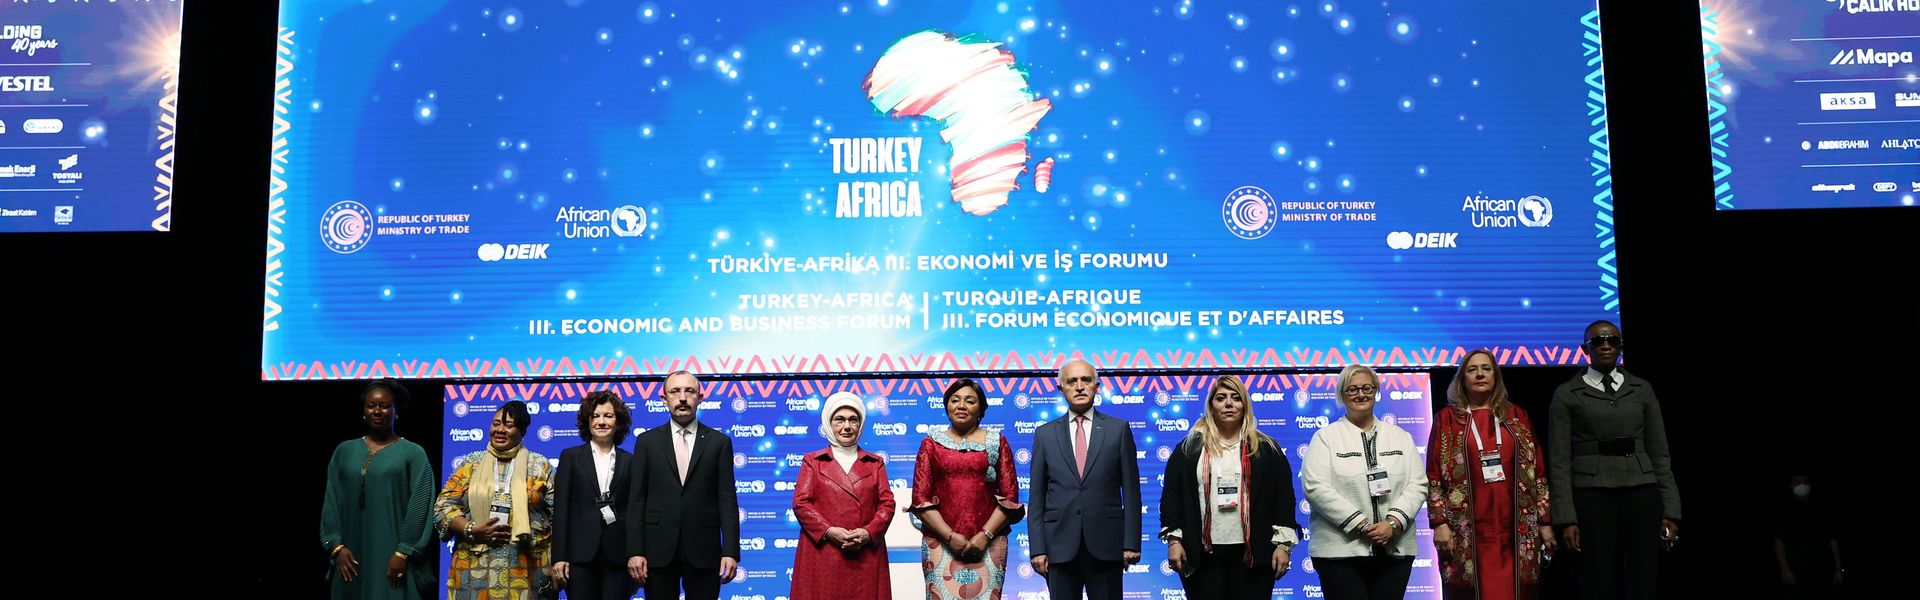 Turkey-Africa Women Leadership Dialogue Panel within the Turkey-Africa Economic and Business Forum in Istanbul on October 22, 2021. 